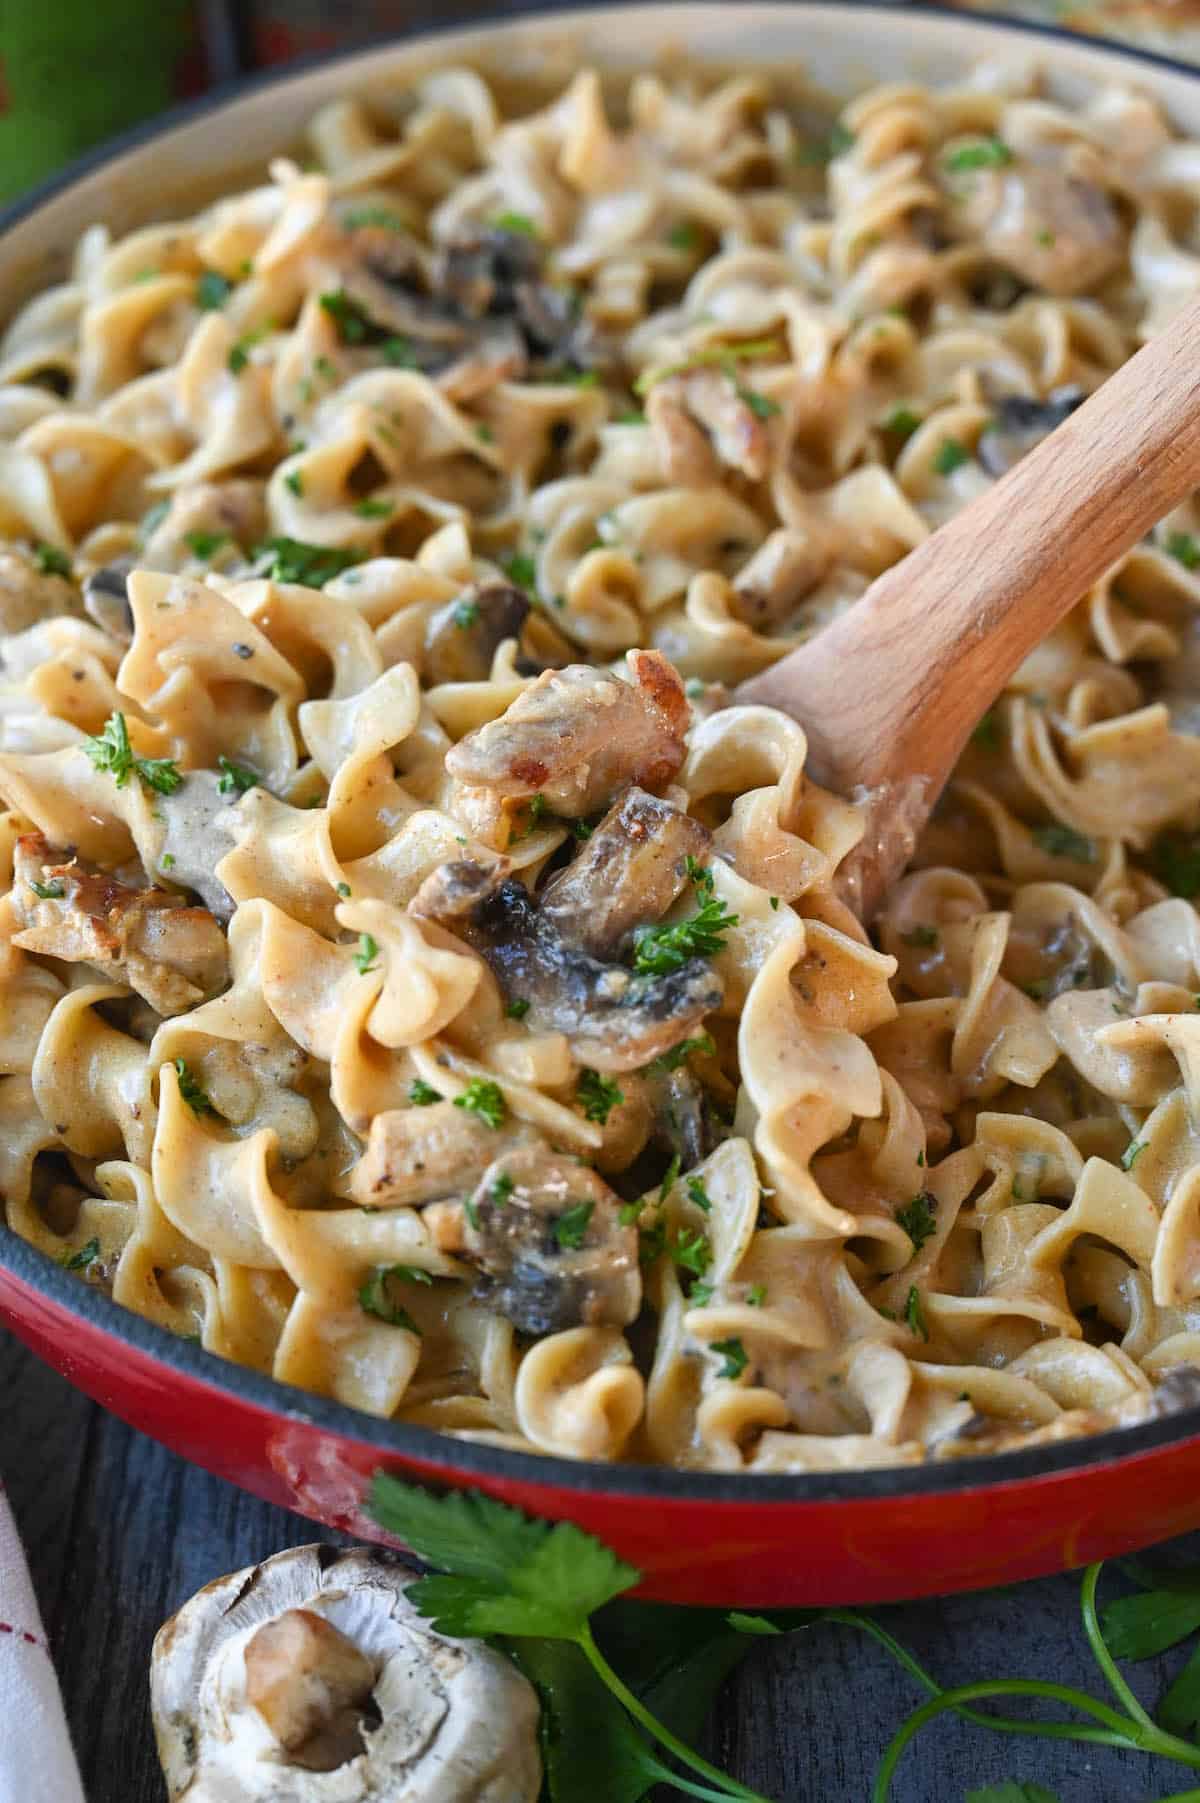 A wooden spoon scooping up a serving of stroganoff.